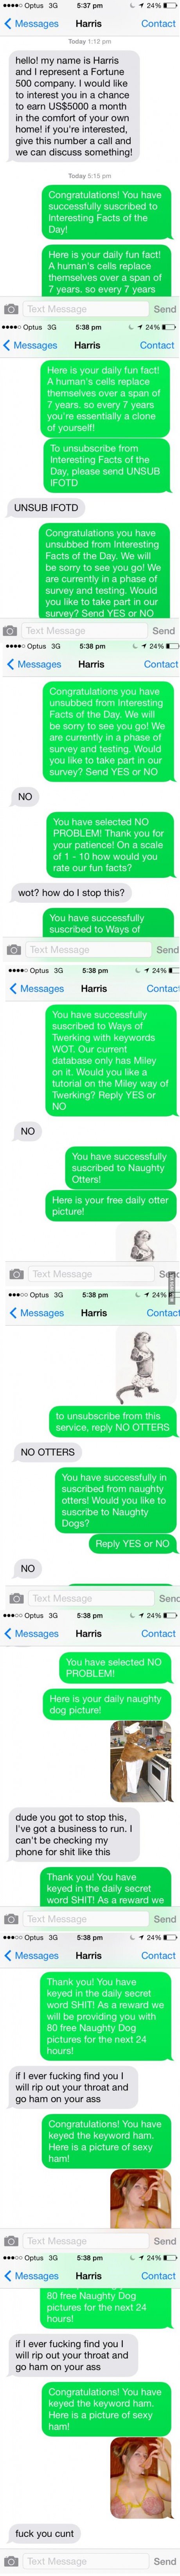 Troll level 999. . no Optus as 5: 37 pm L l 24% 4 Messages Harris Contact Today 1: 12 pm hello! my name is Harris and I represent a Fortune 500 company. I would